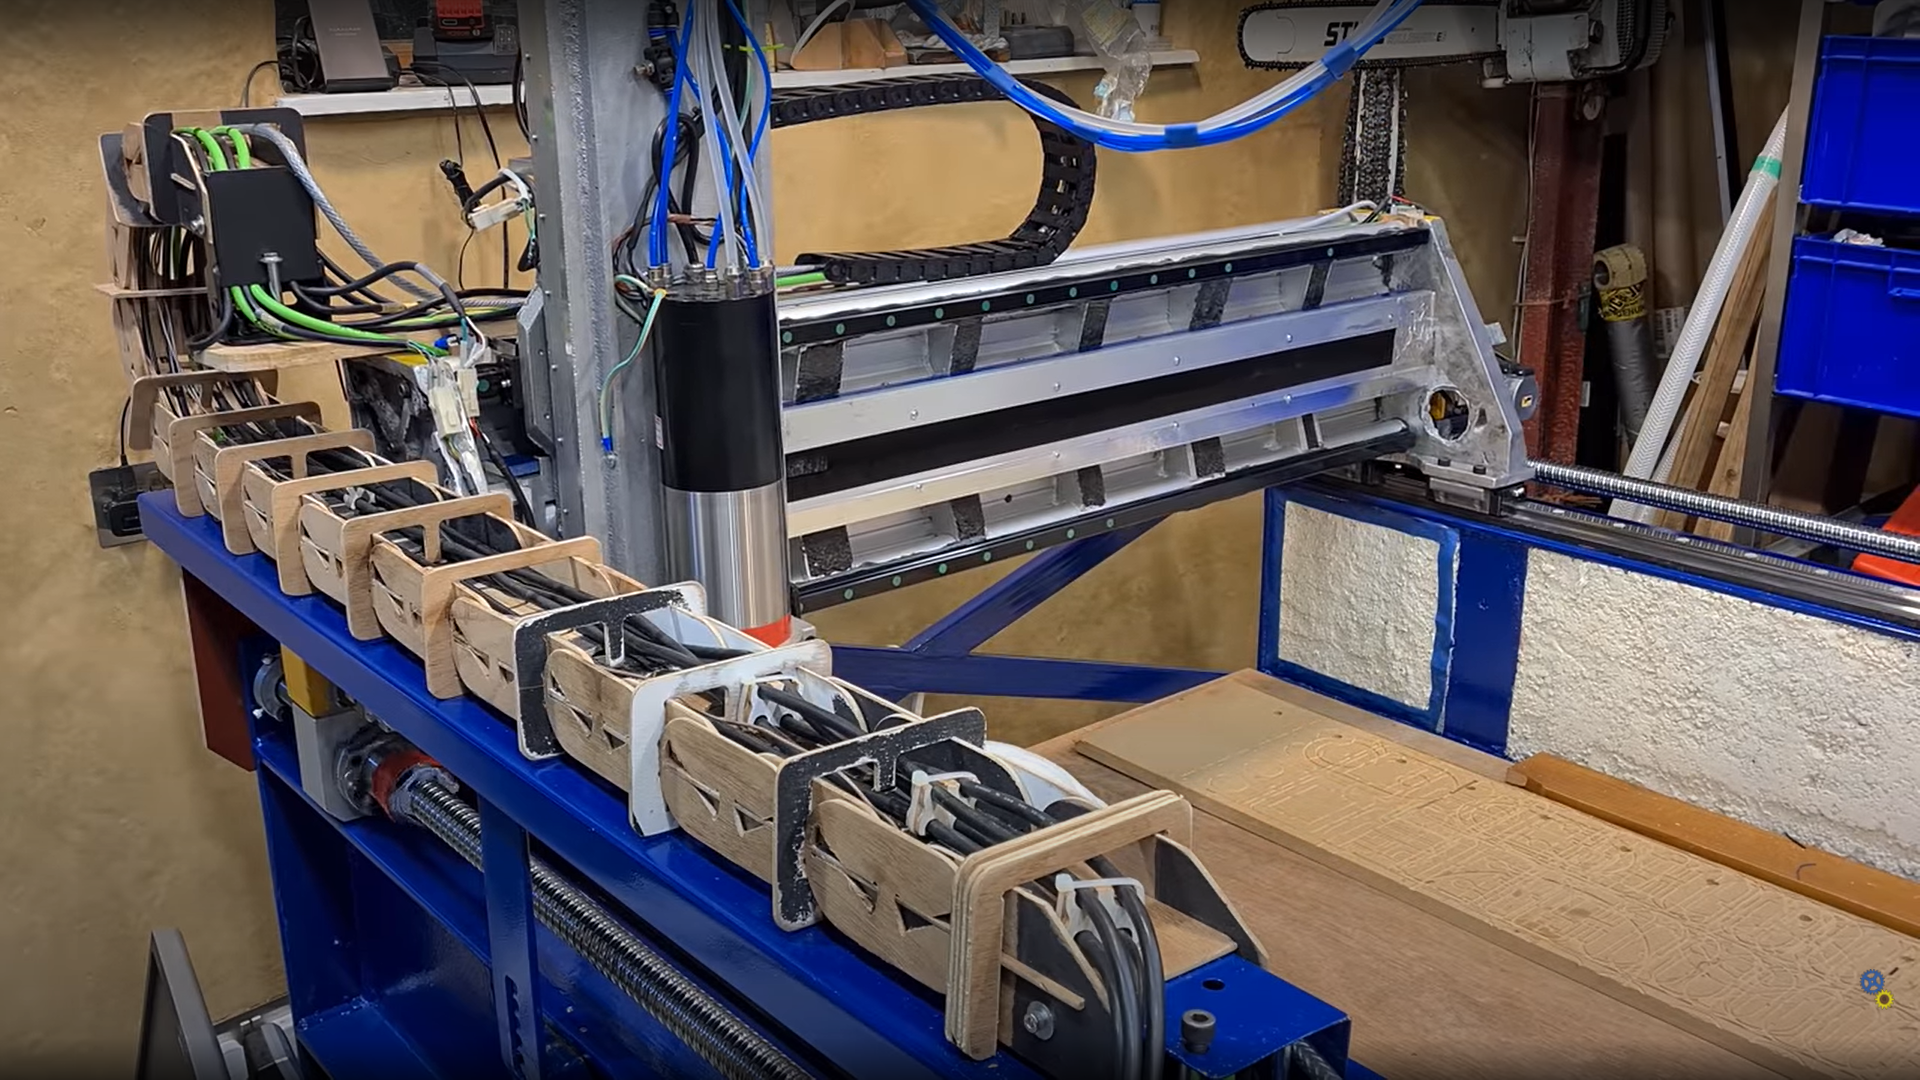 Can You Build An Grade CNC With Only DIY | Hackaday